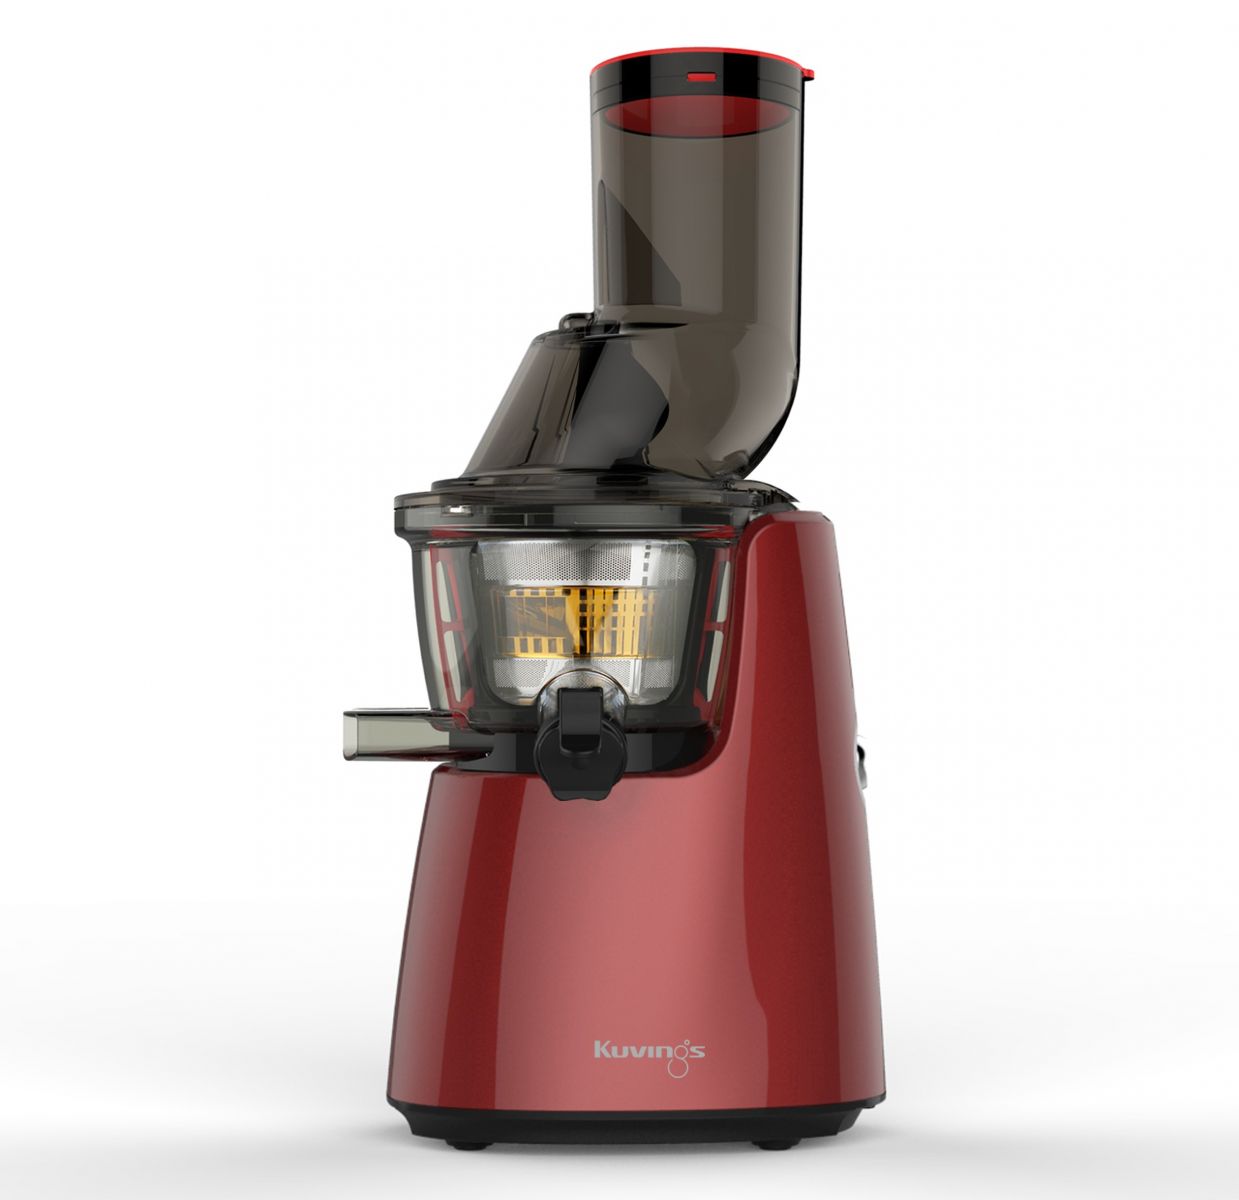 KUNGVINGS C7000 WHOLE SLOW JUICER REVIEW